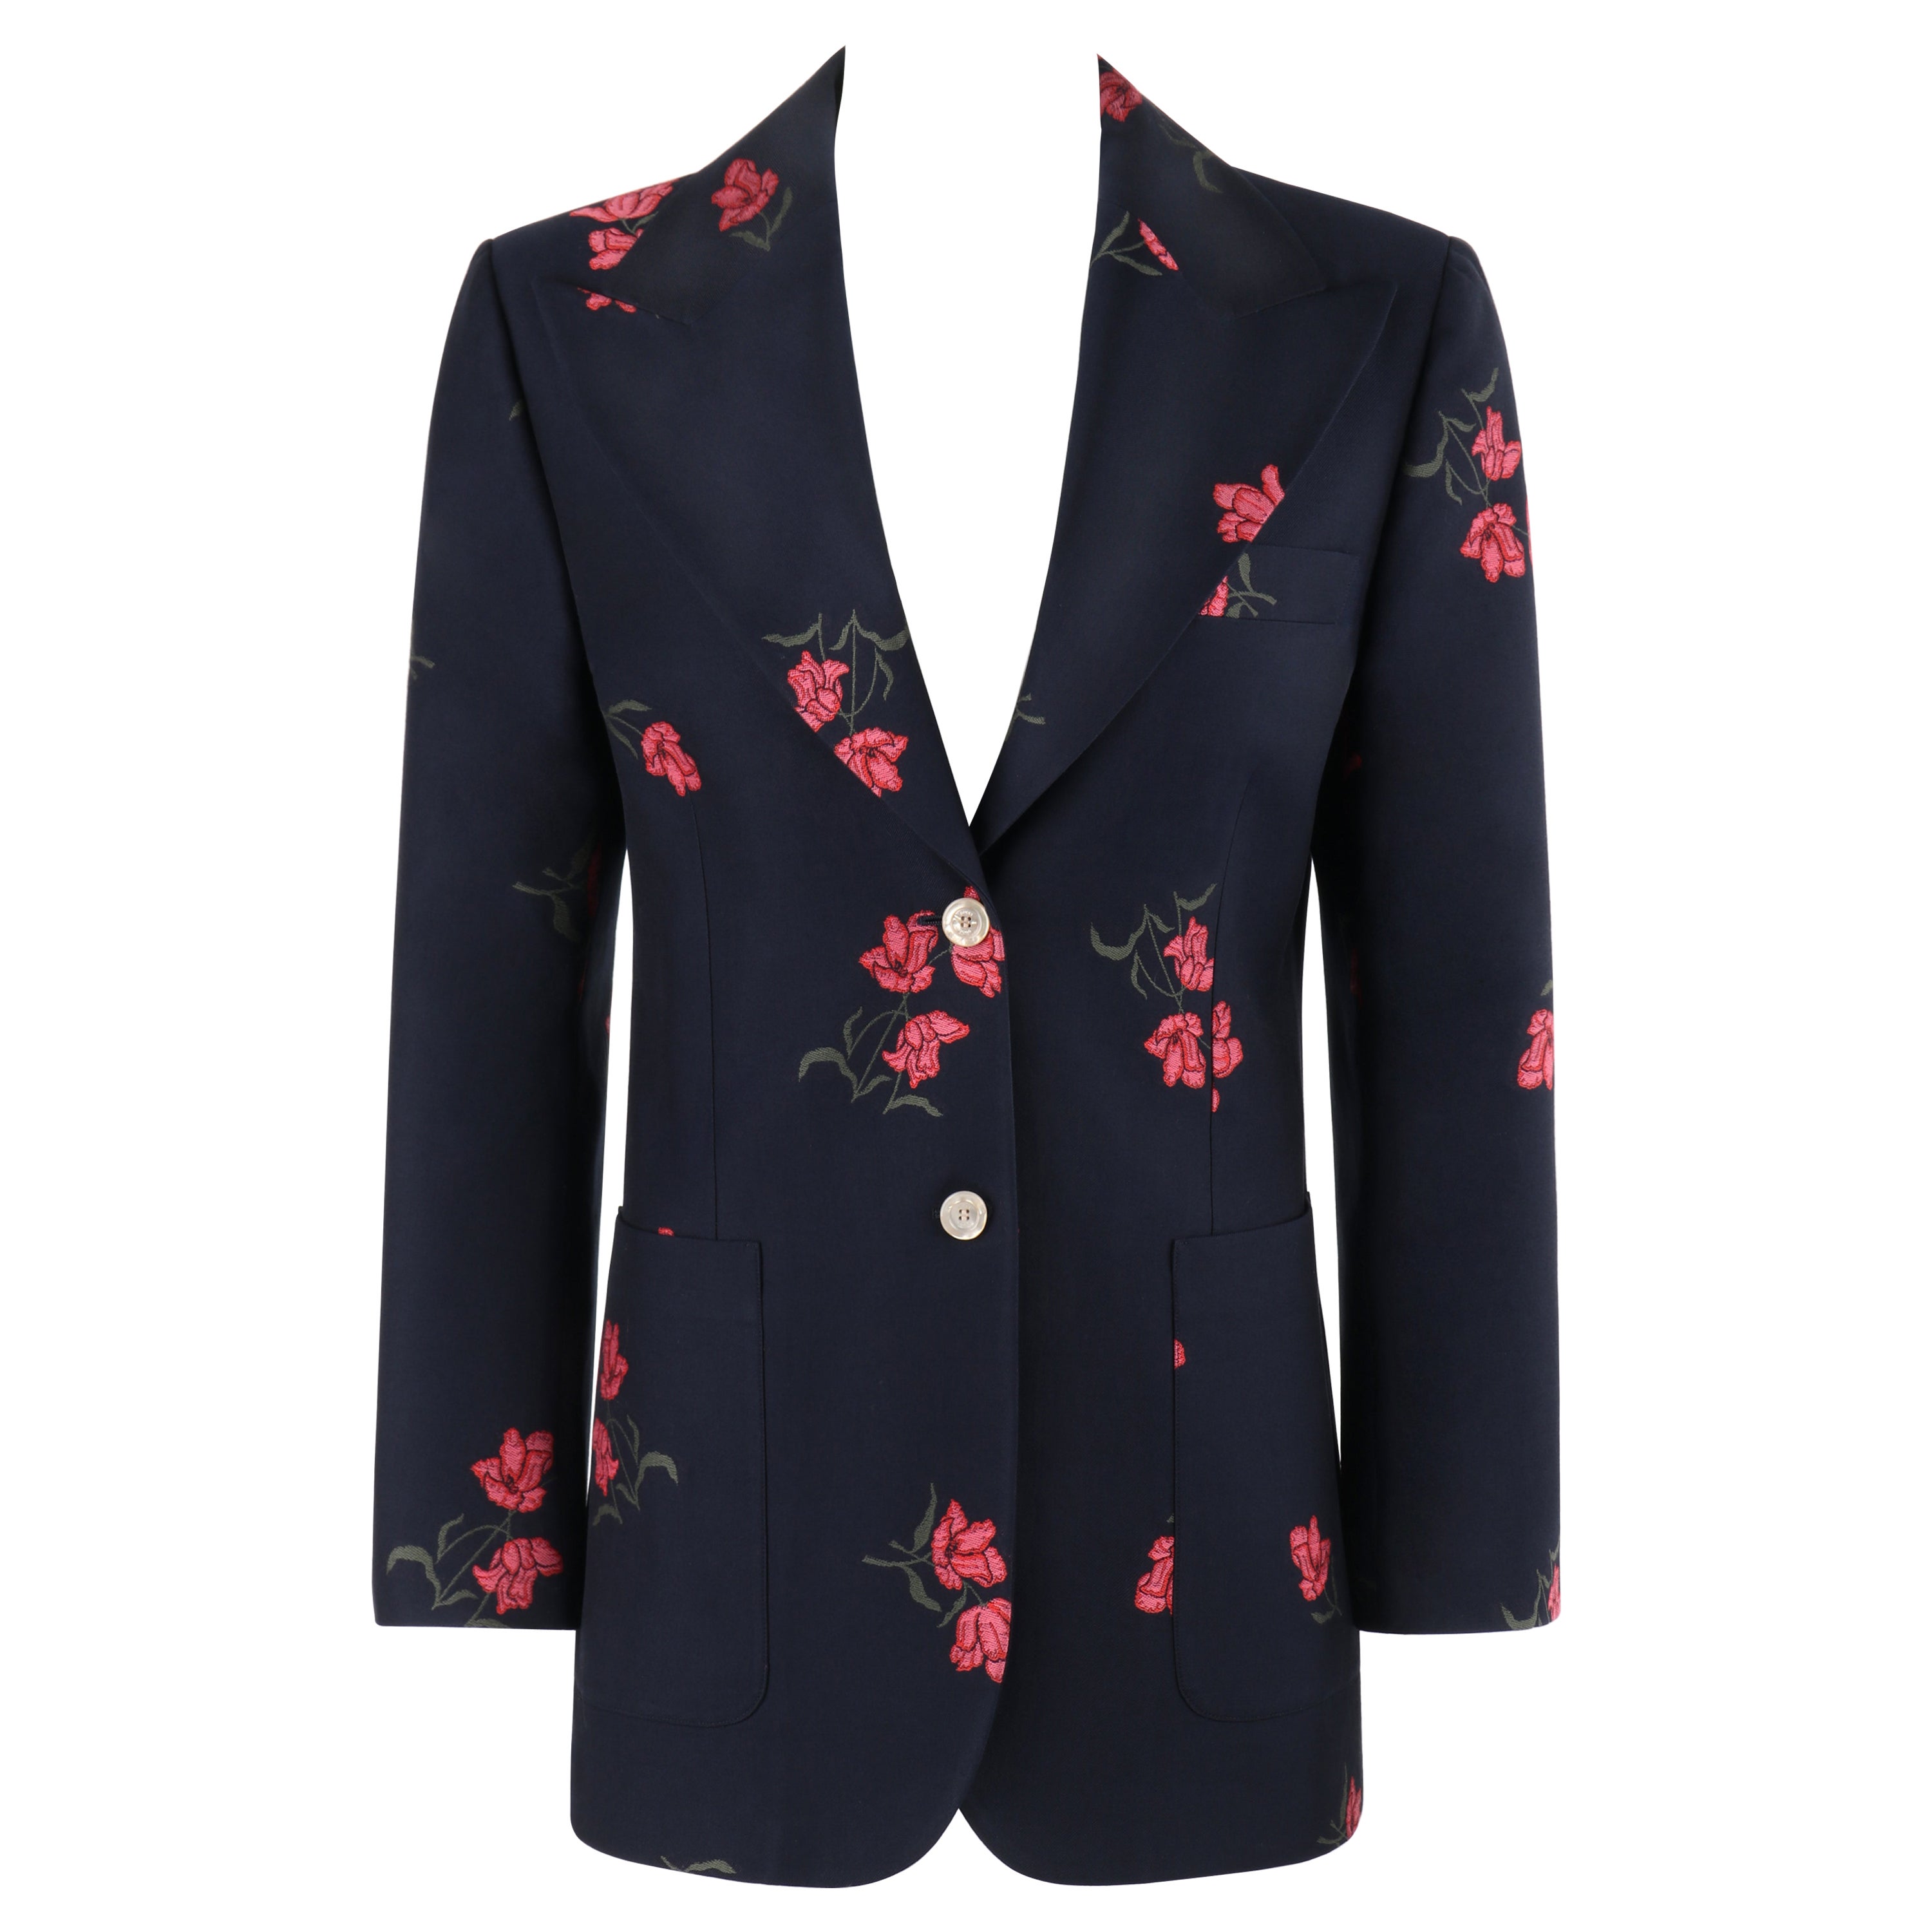 GUCCI S/S 2017 Blue Green Pink Floral Wool Pointed Collar Blazer Jacket For Sale